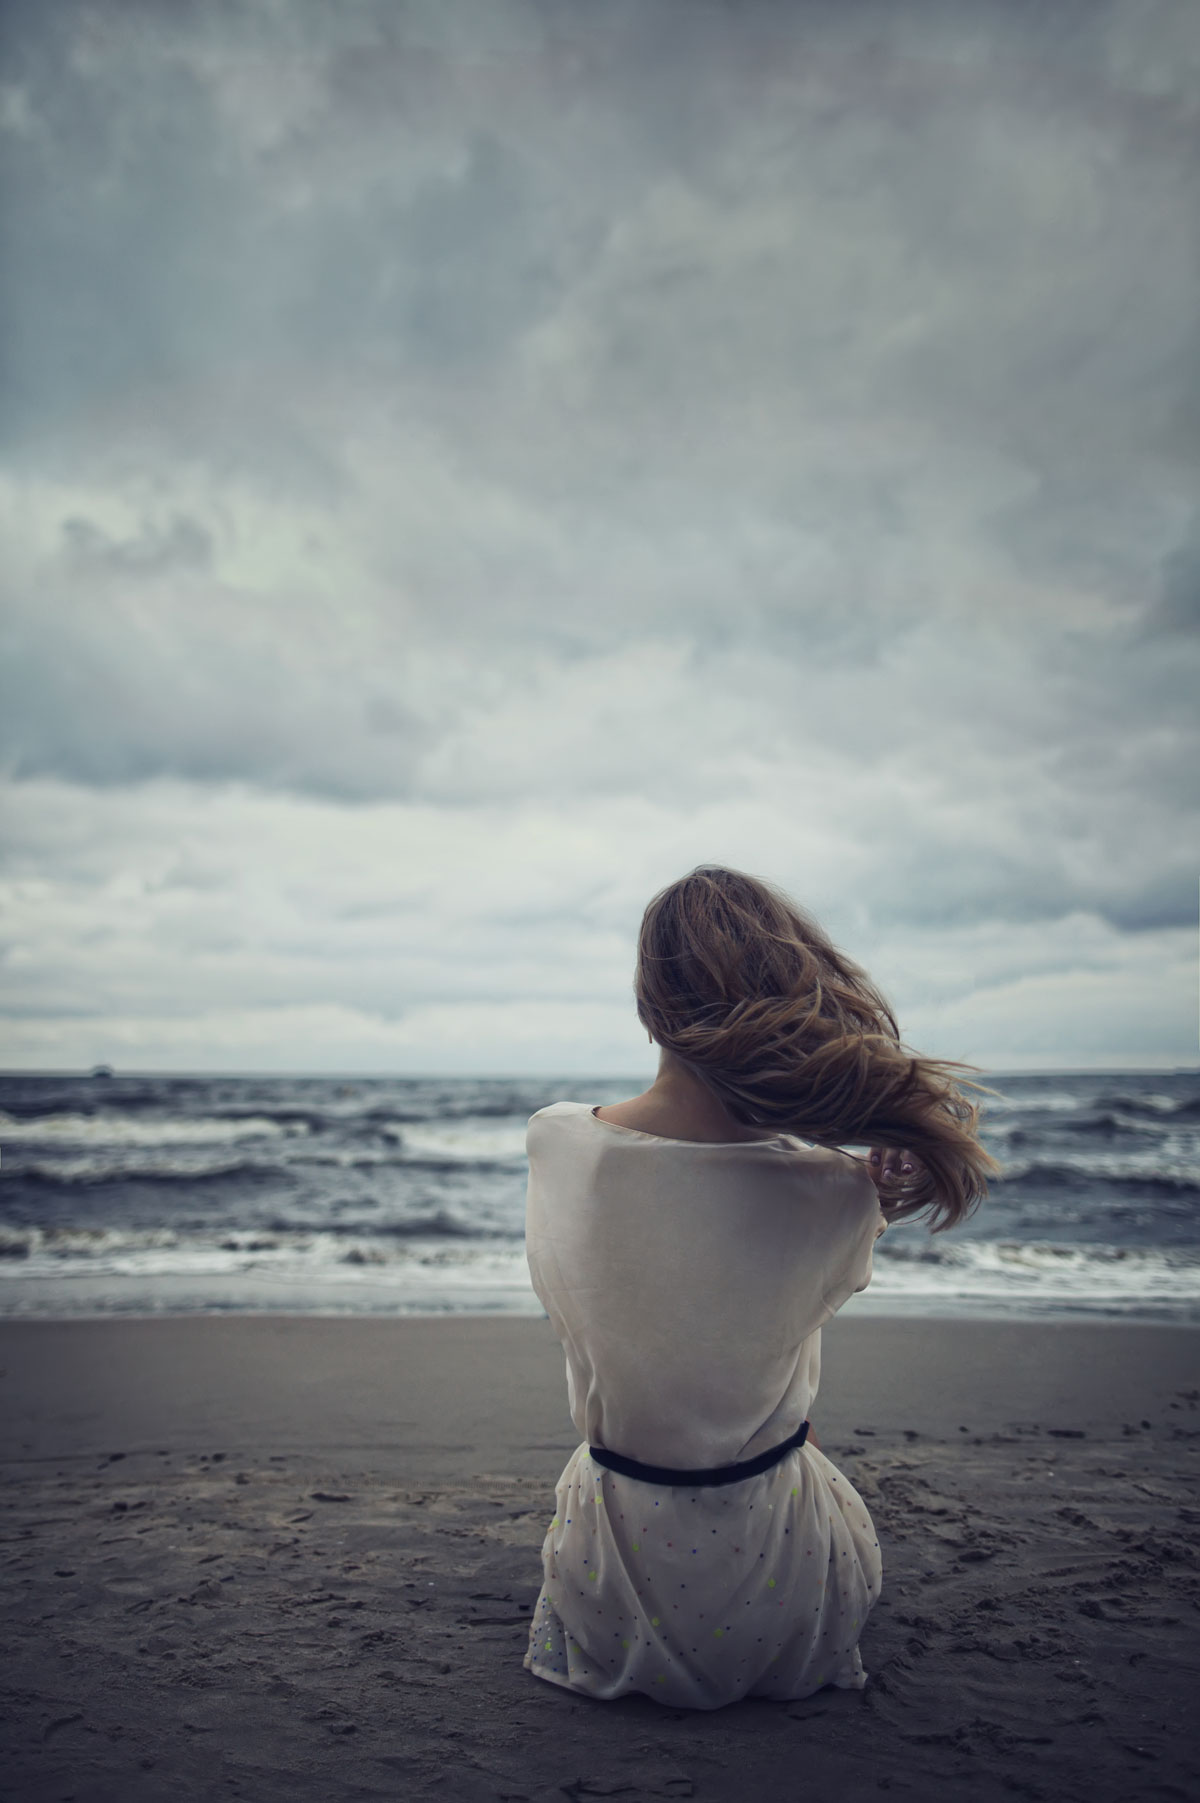 A depressed woman on a cold beach